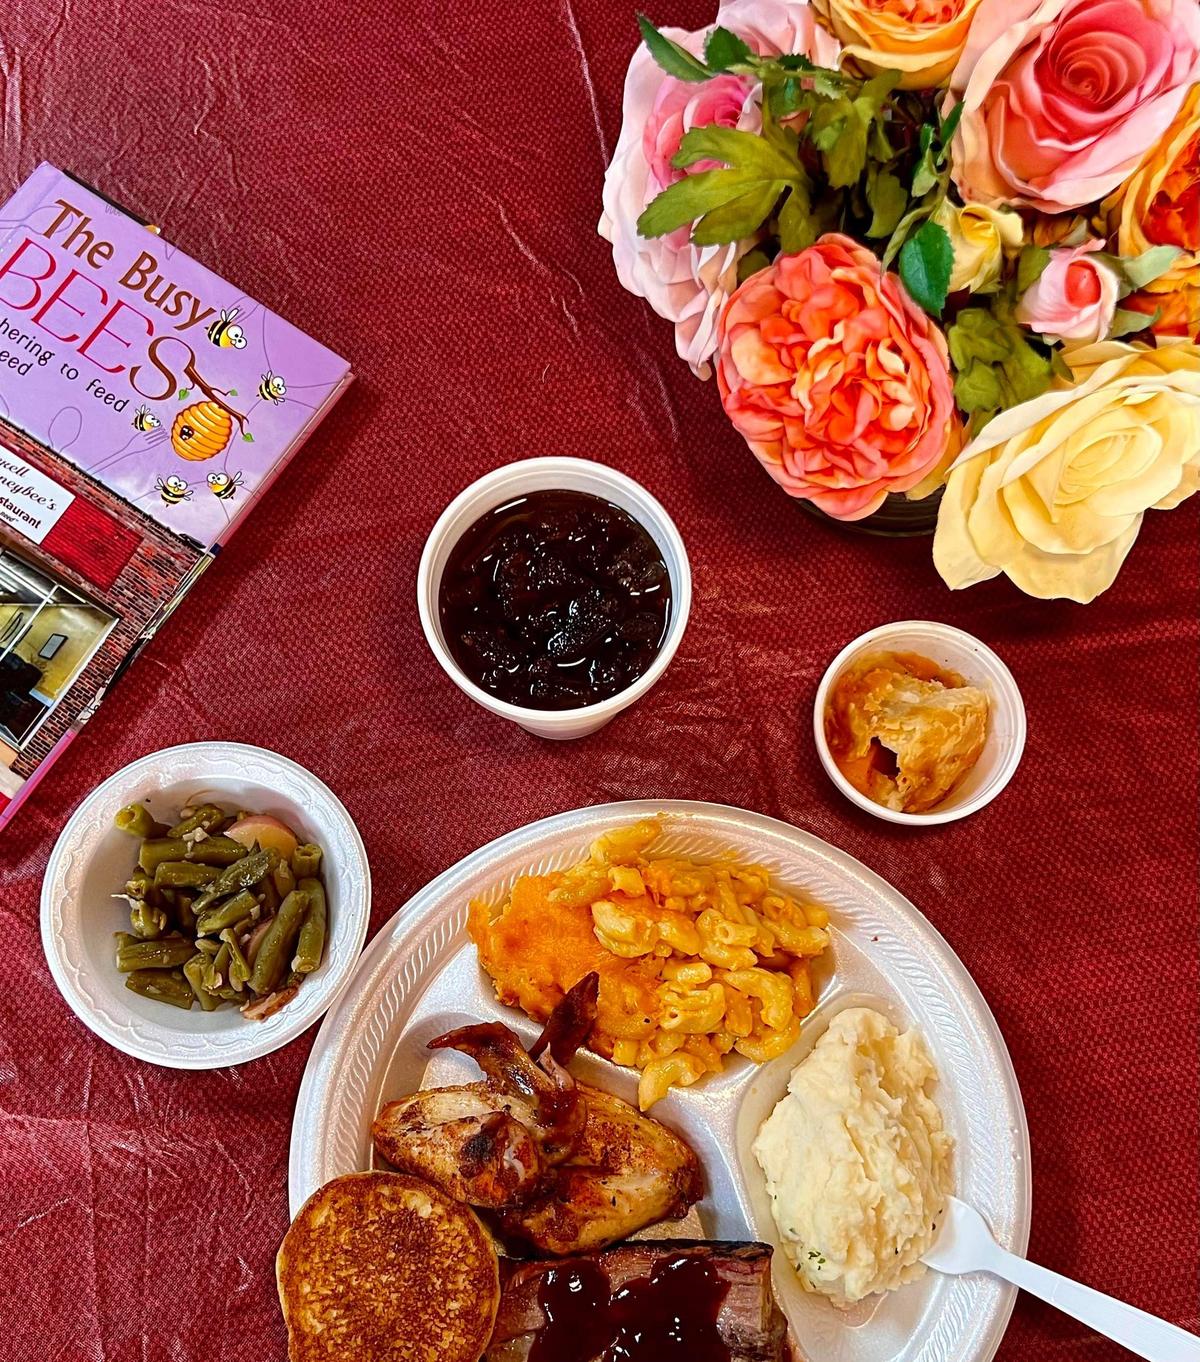 The restaurant serves good old-fashioned Southern home cooking. (Courtesy of Drexell & Honeybee's)